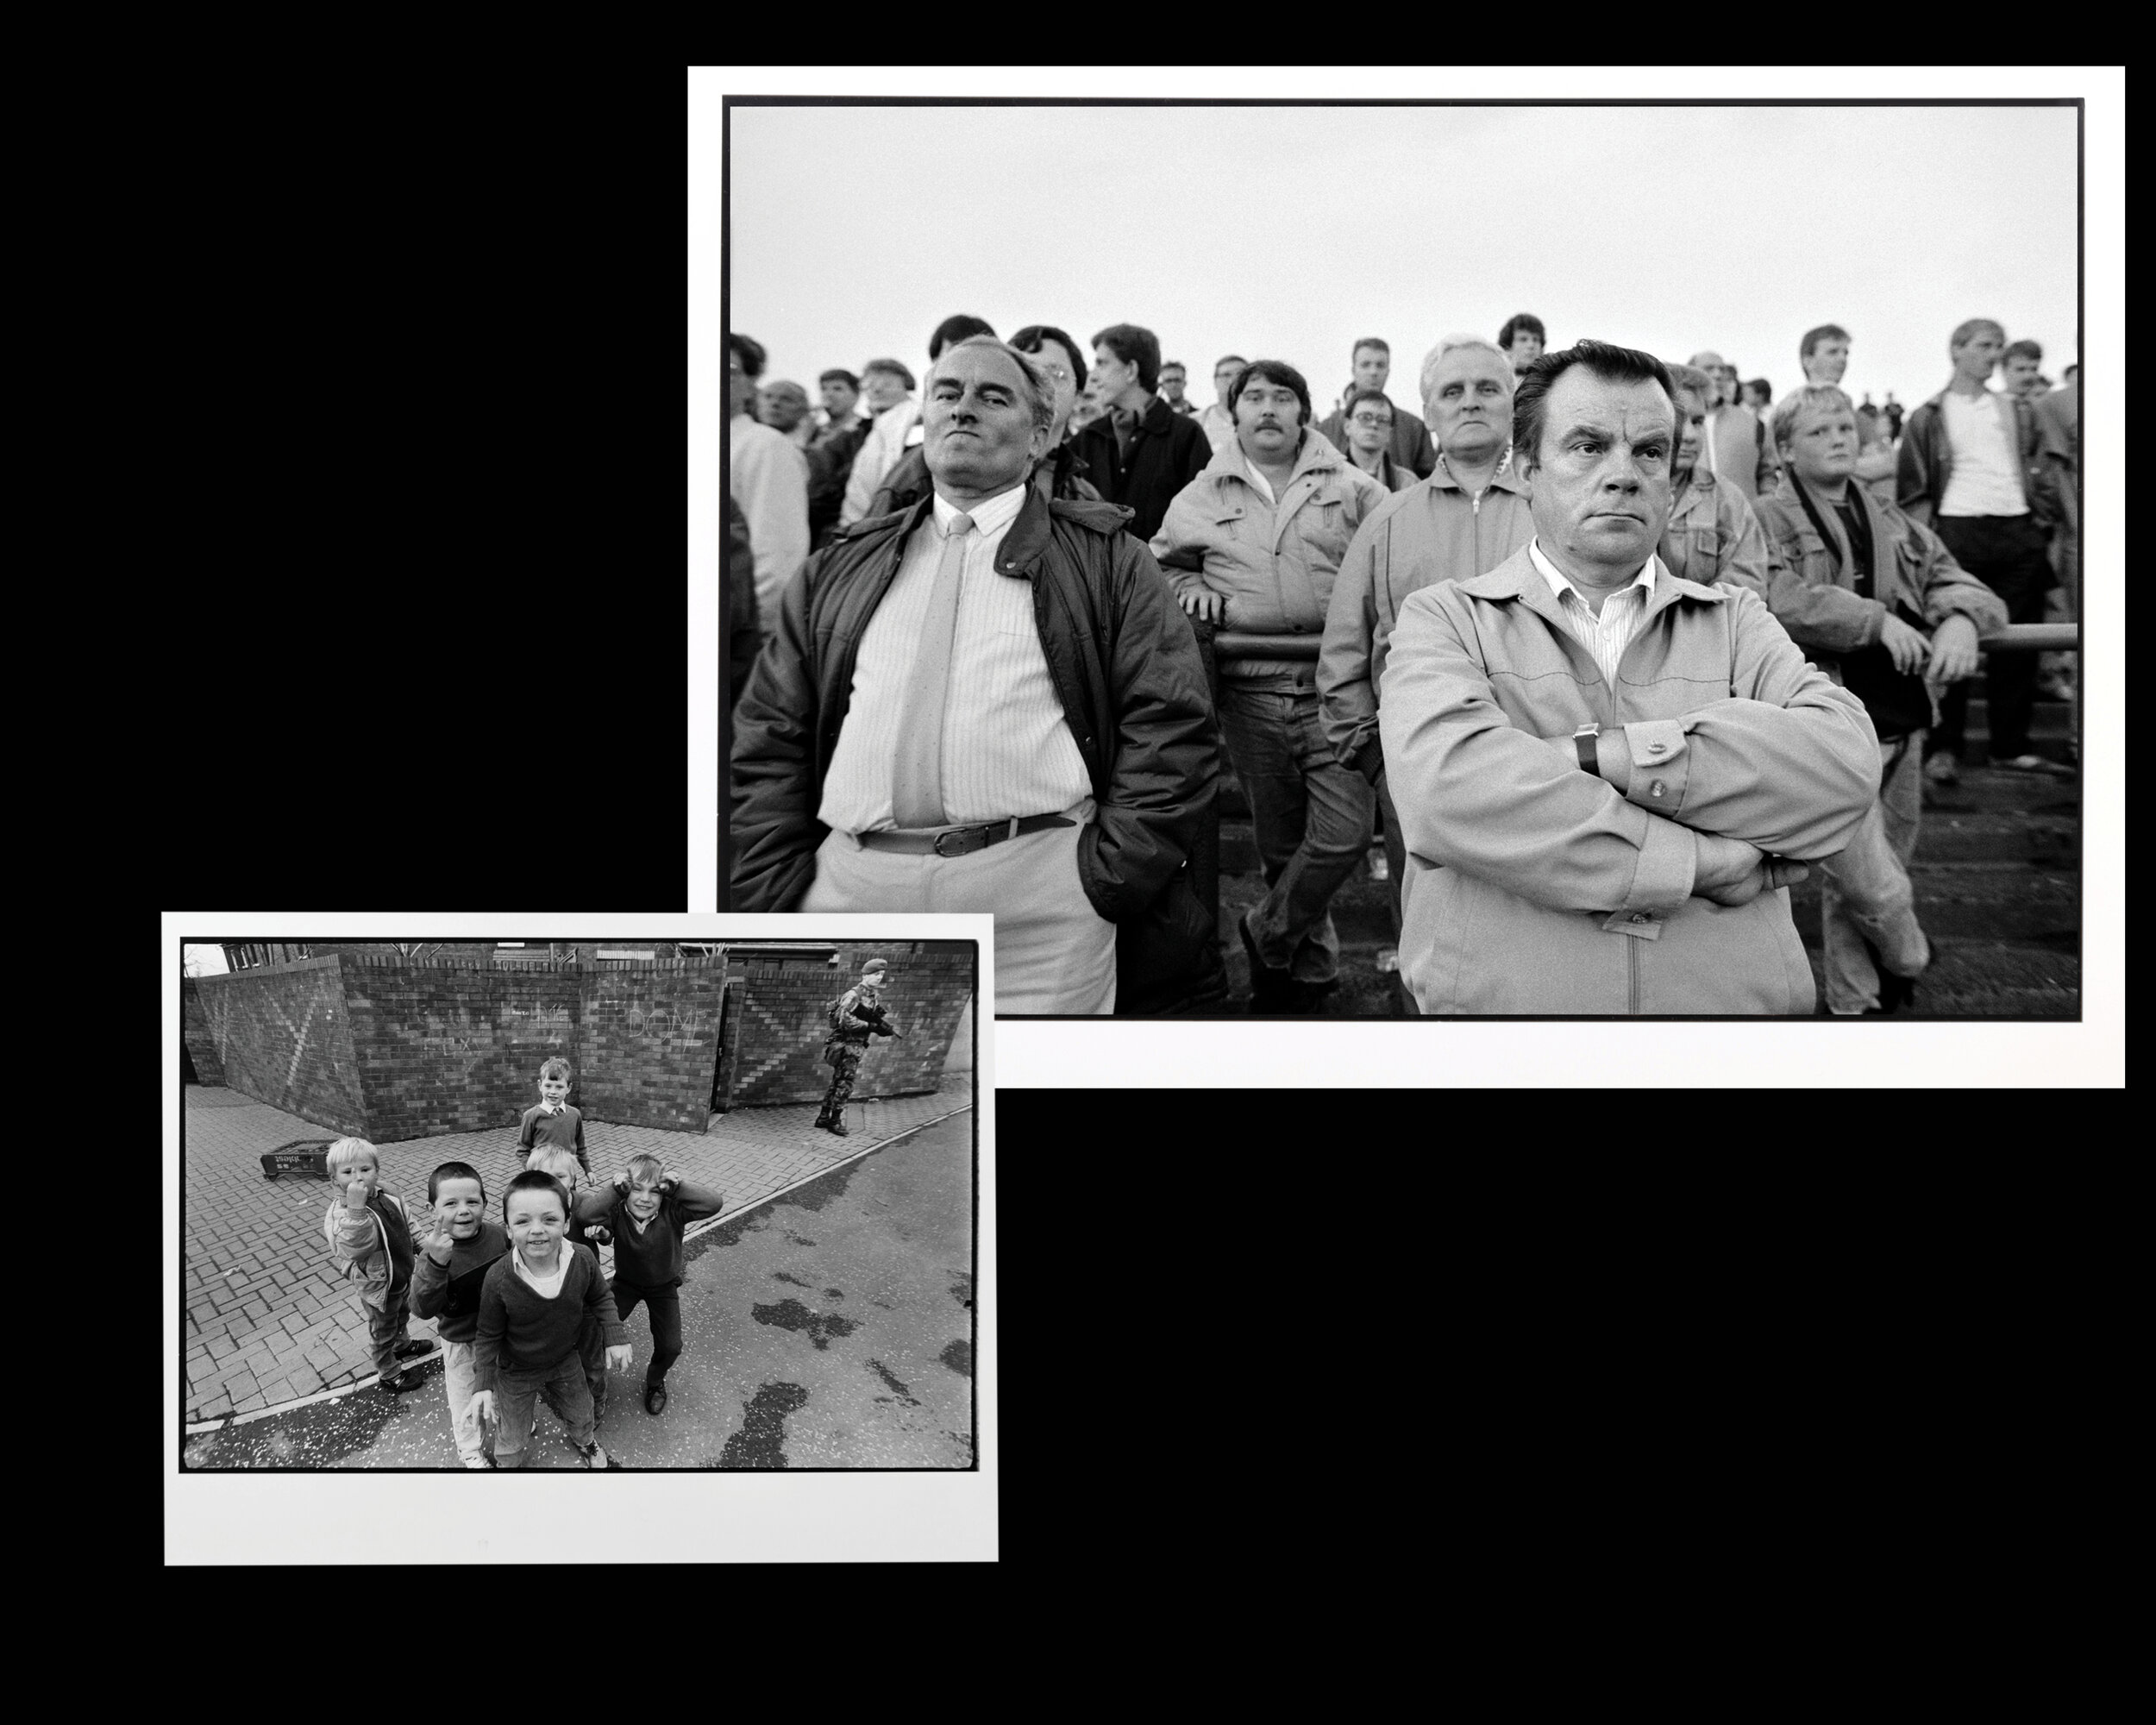  (L) Catholic boys play while a British soldier stands in the background in Belfast, Northern Ireland. 1988 (R) Spectators at a soccer game in Belfast, Northern Ireland. 1989 